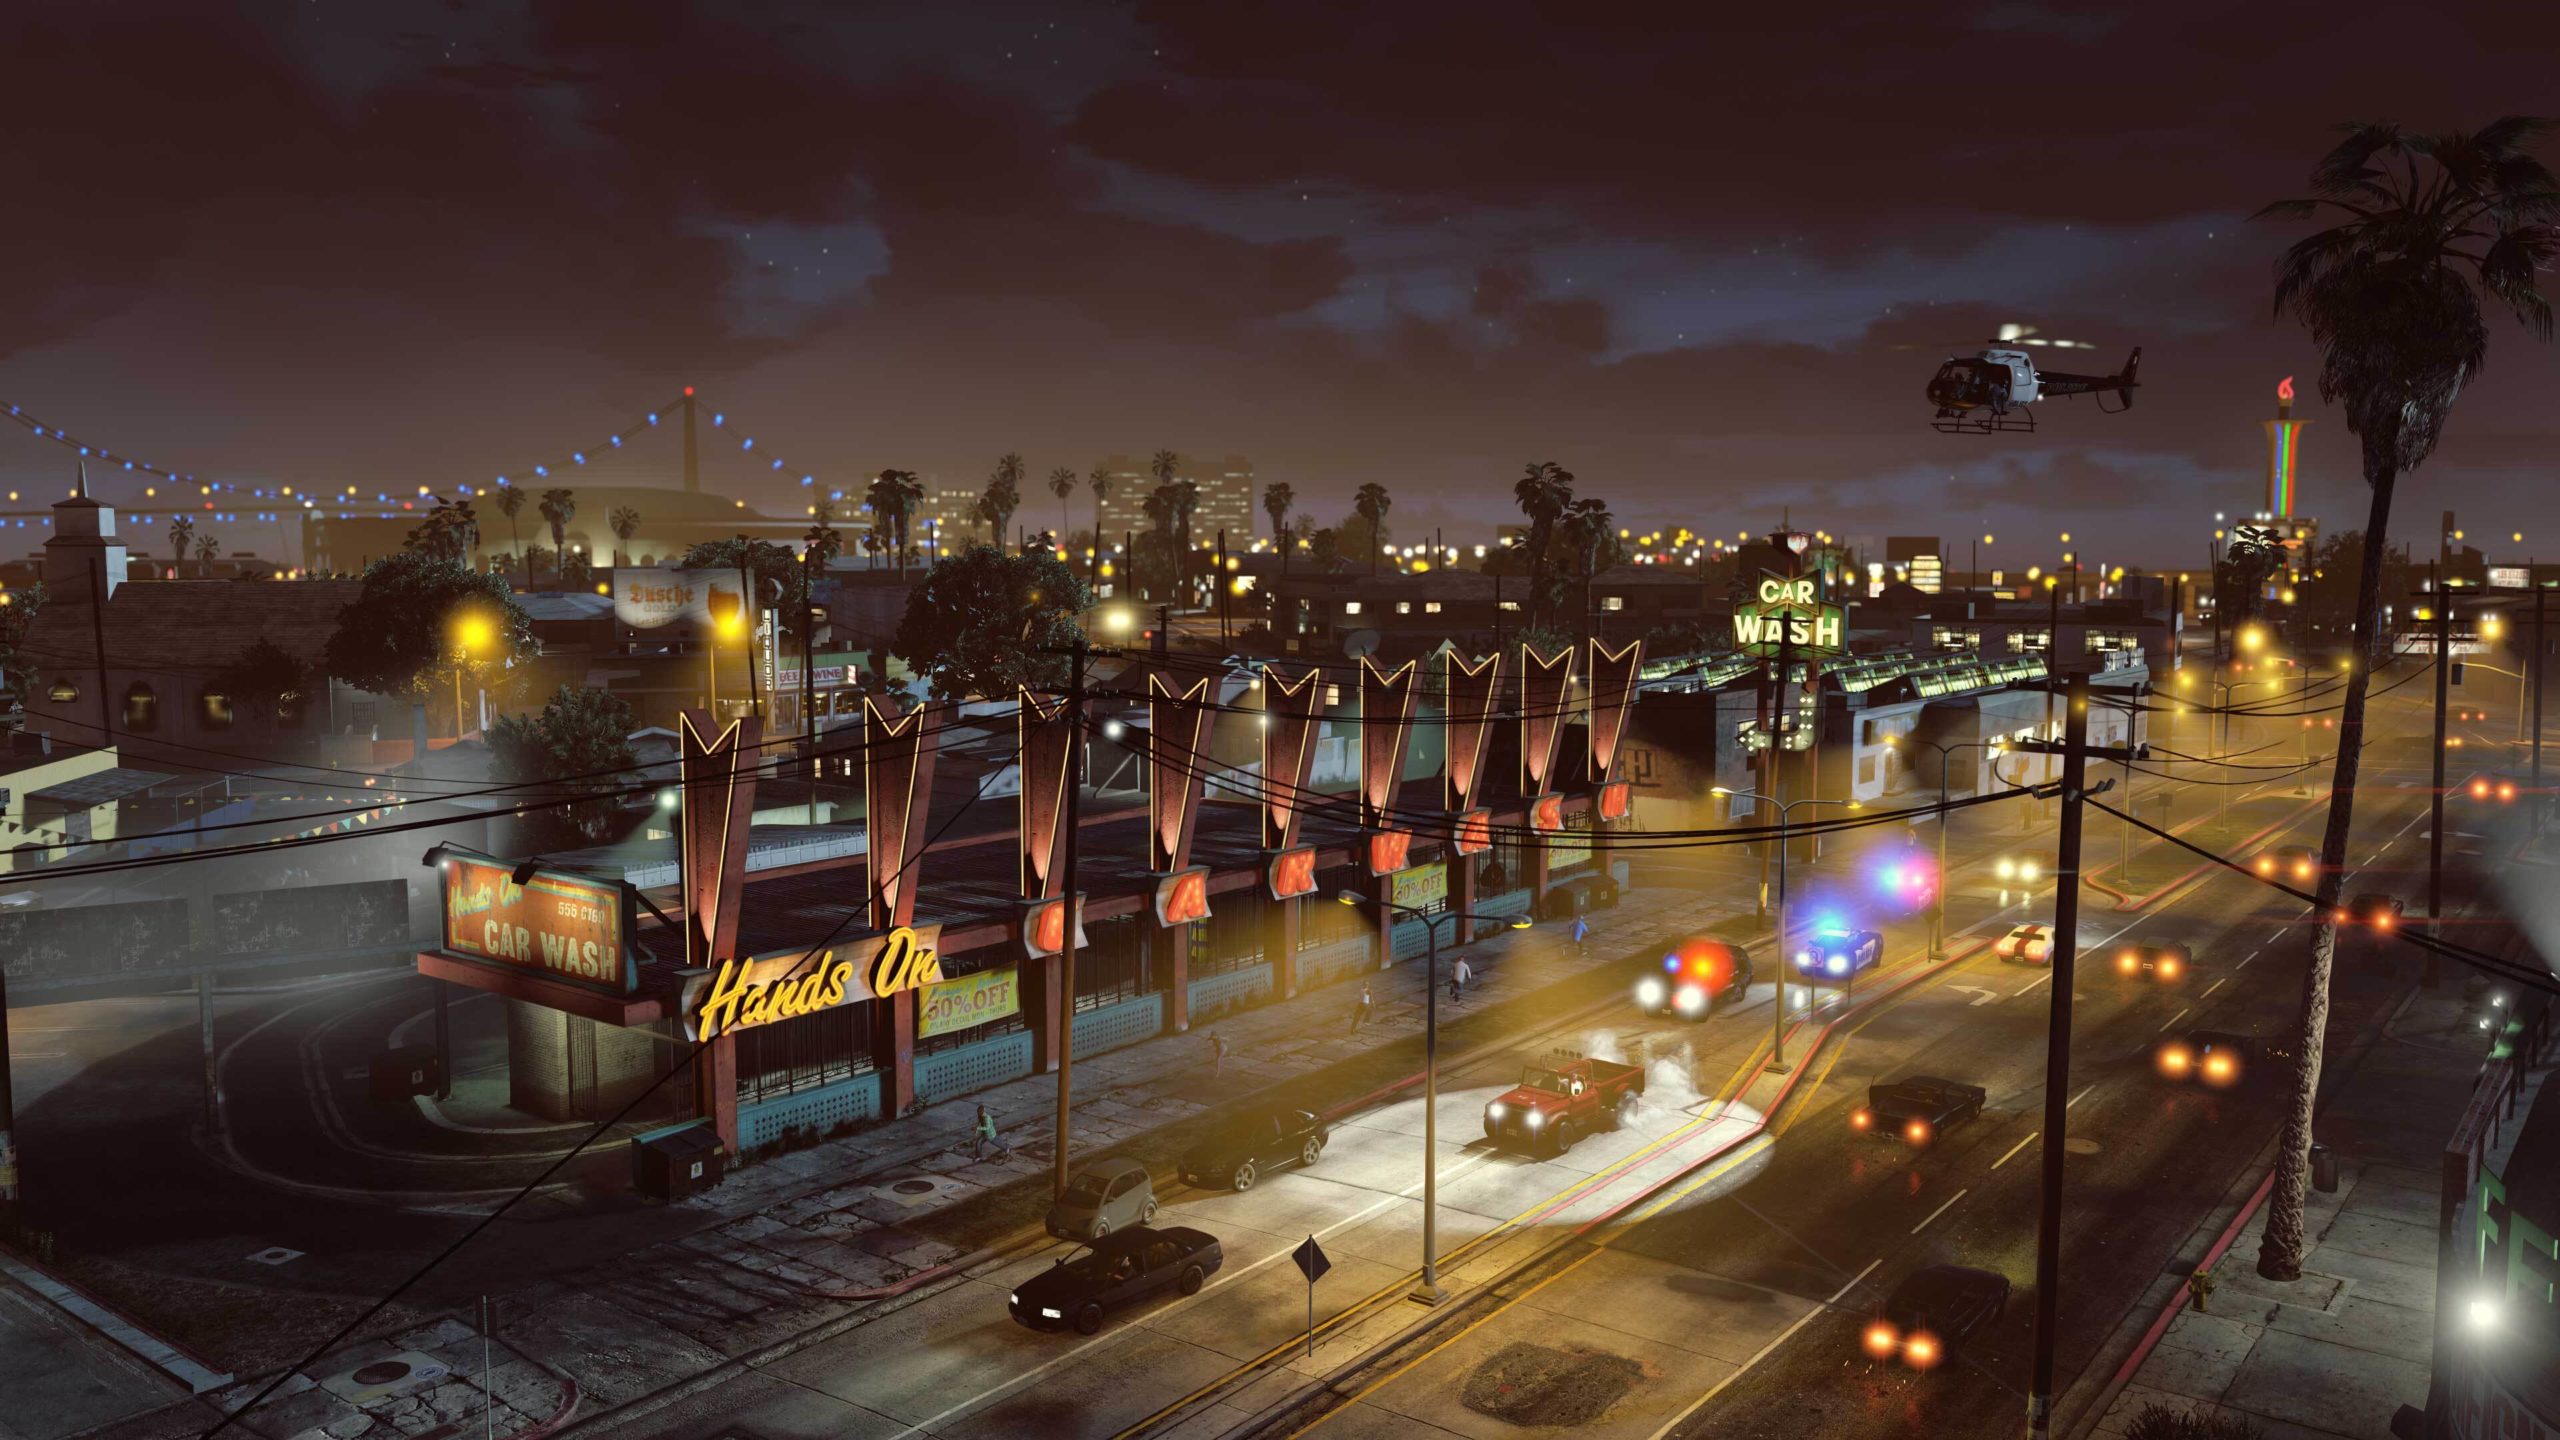 GTA 6: Alleged Leaks Showcase Female Protagonist, Return of Vice City  Locations and Much More